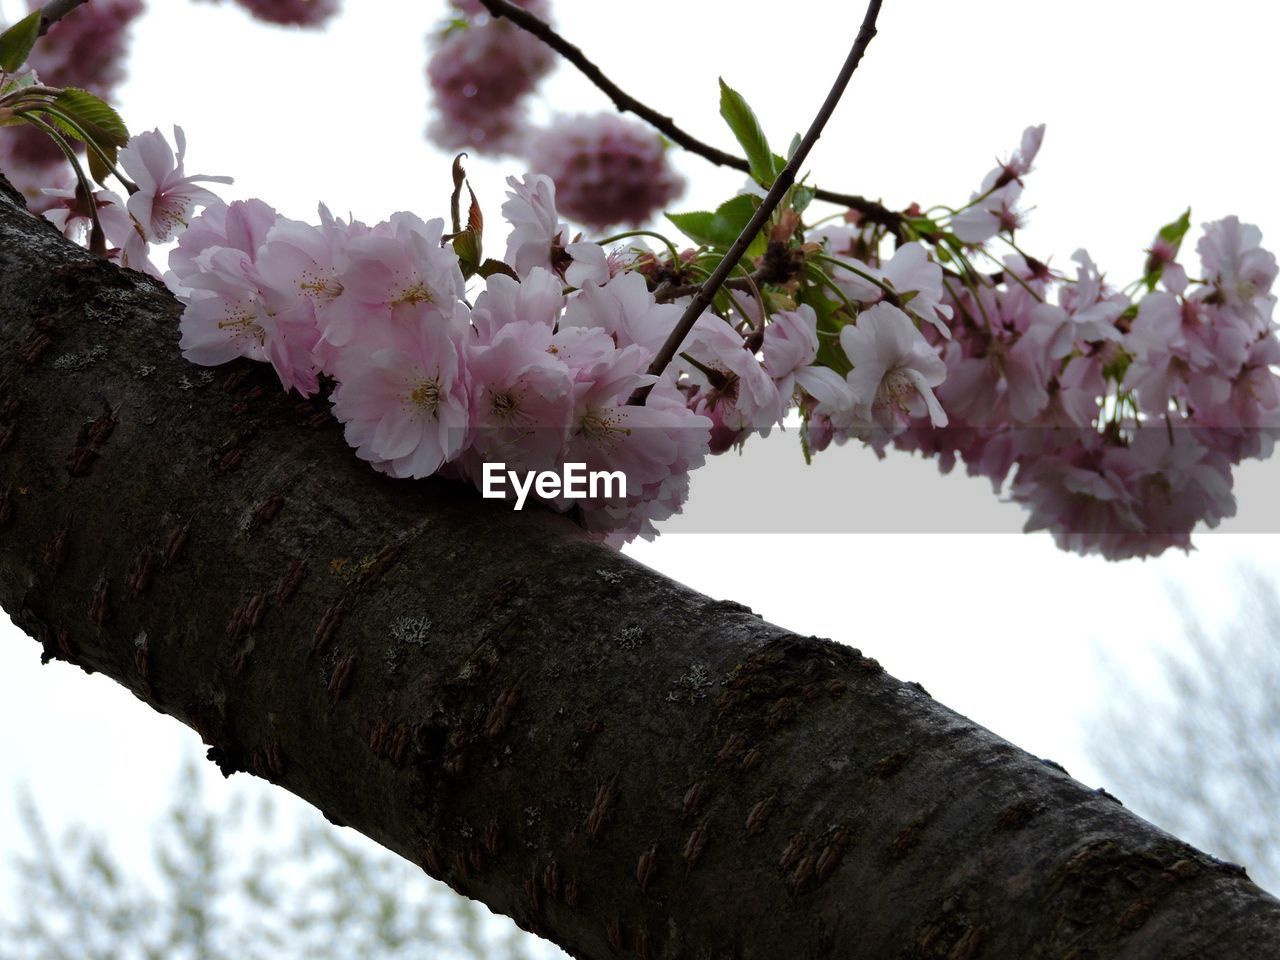 LOW ANGLE VIEW OF PINK FLOWERS BLOOMING ON TREE